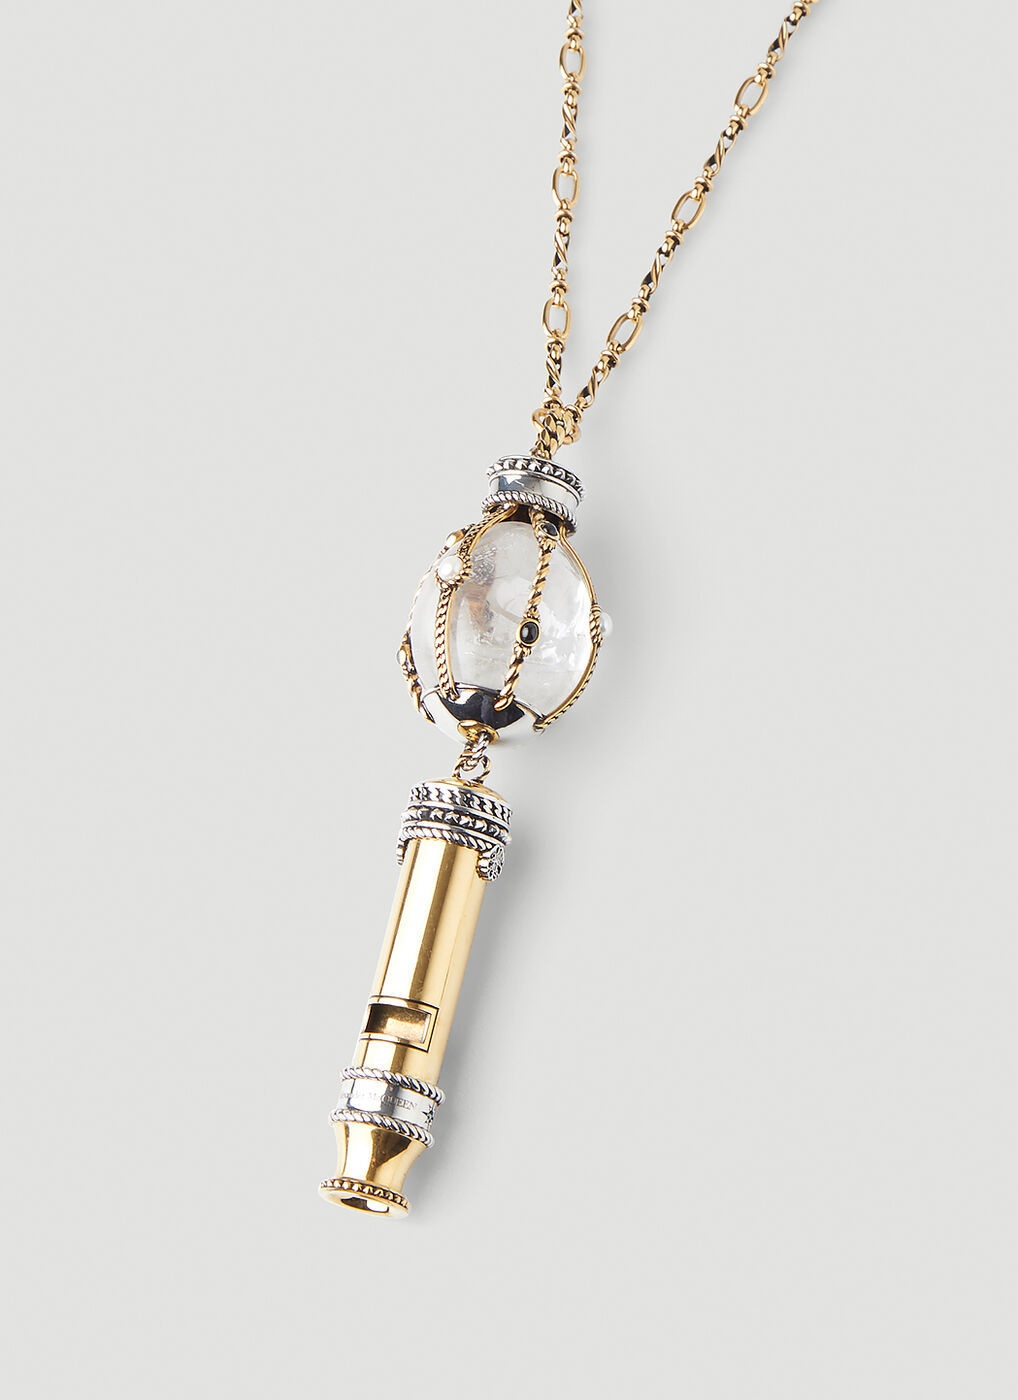 Whistle Pendant Necklace in Gold Alexander McQueen